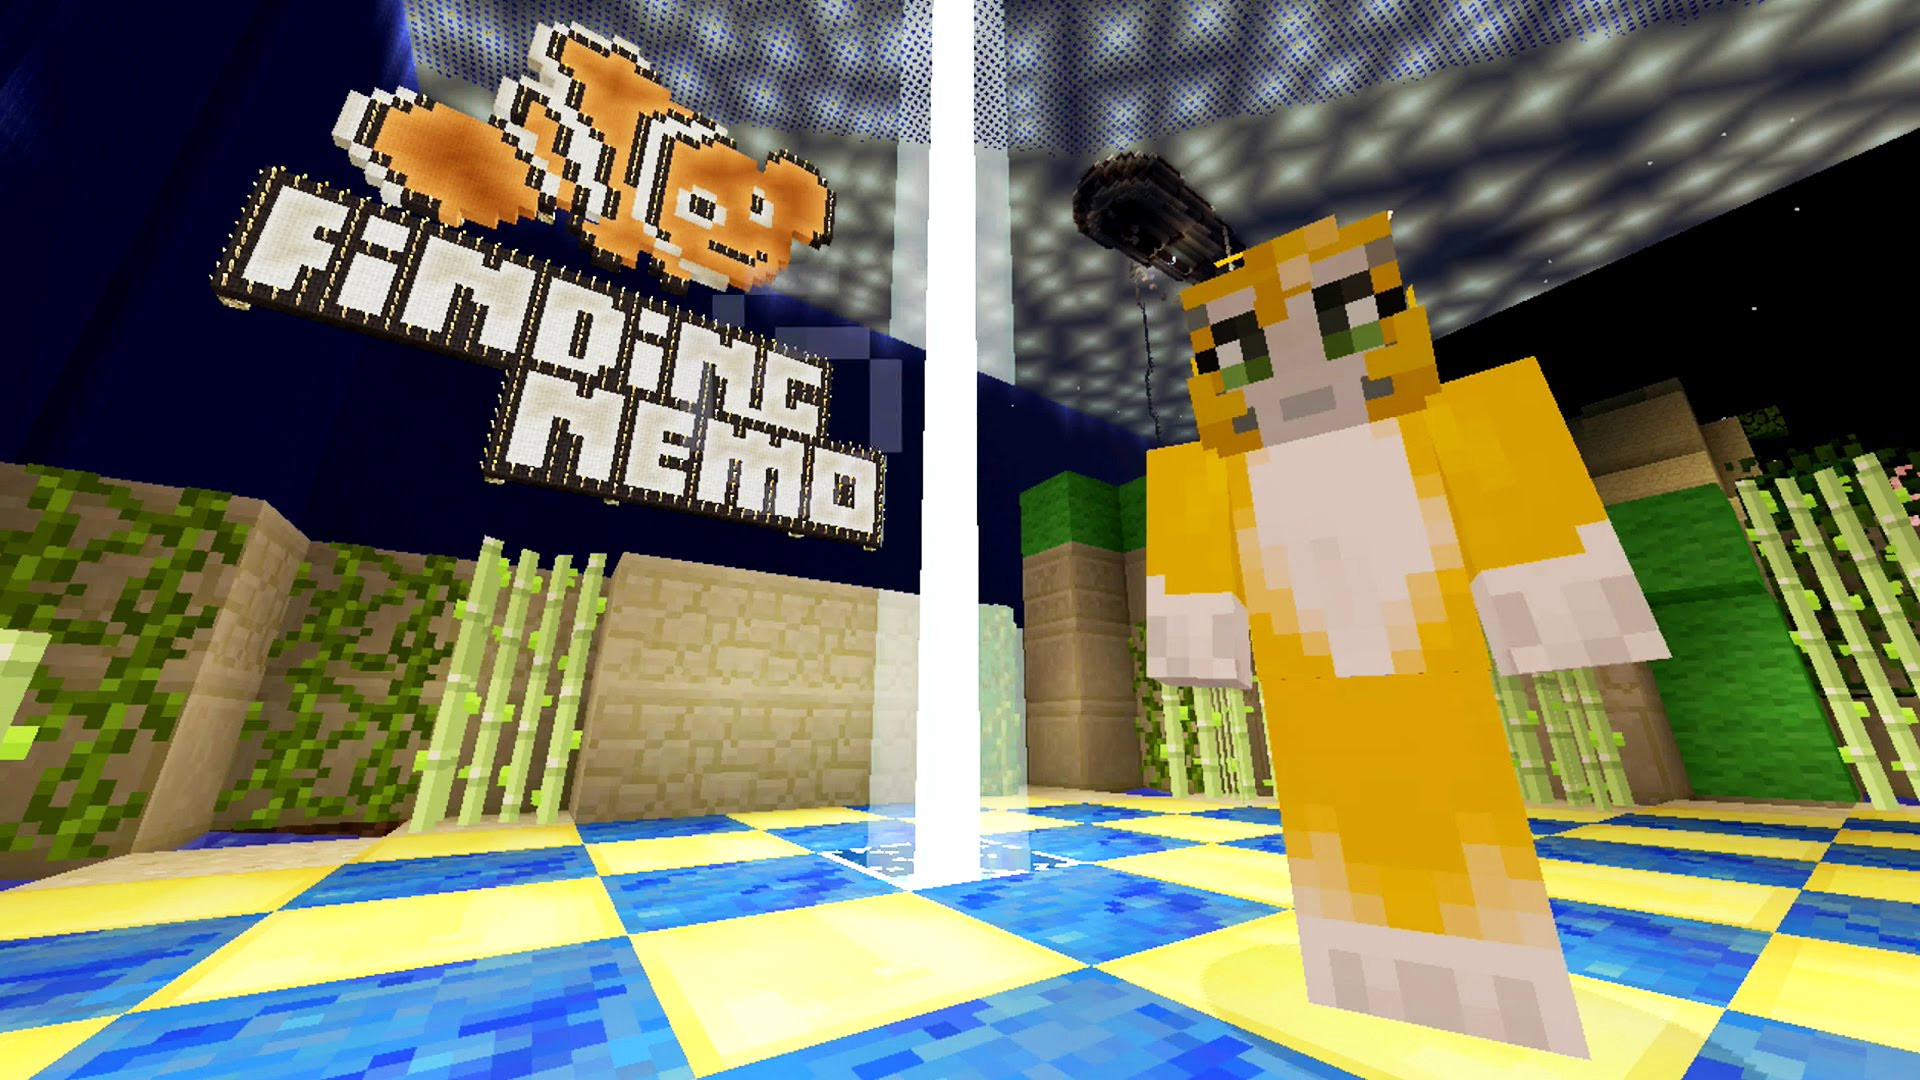 1920x1080 Minecraft Xbox Finding Nemo Up And 1 YouTube At Stampy Squid Adventure Maps